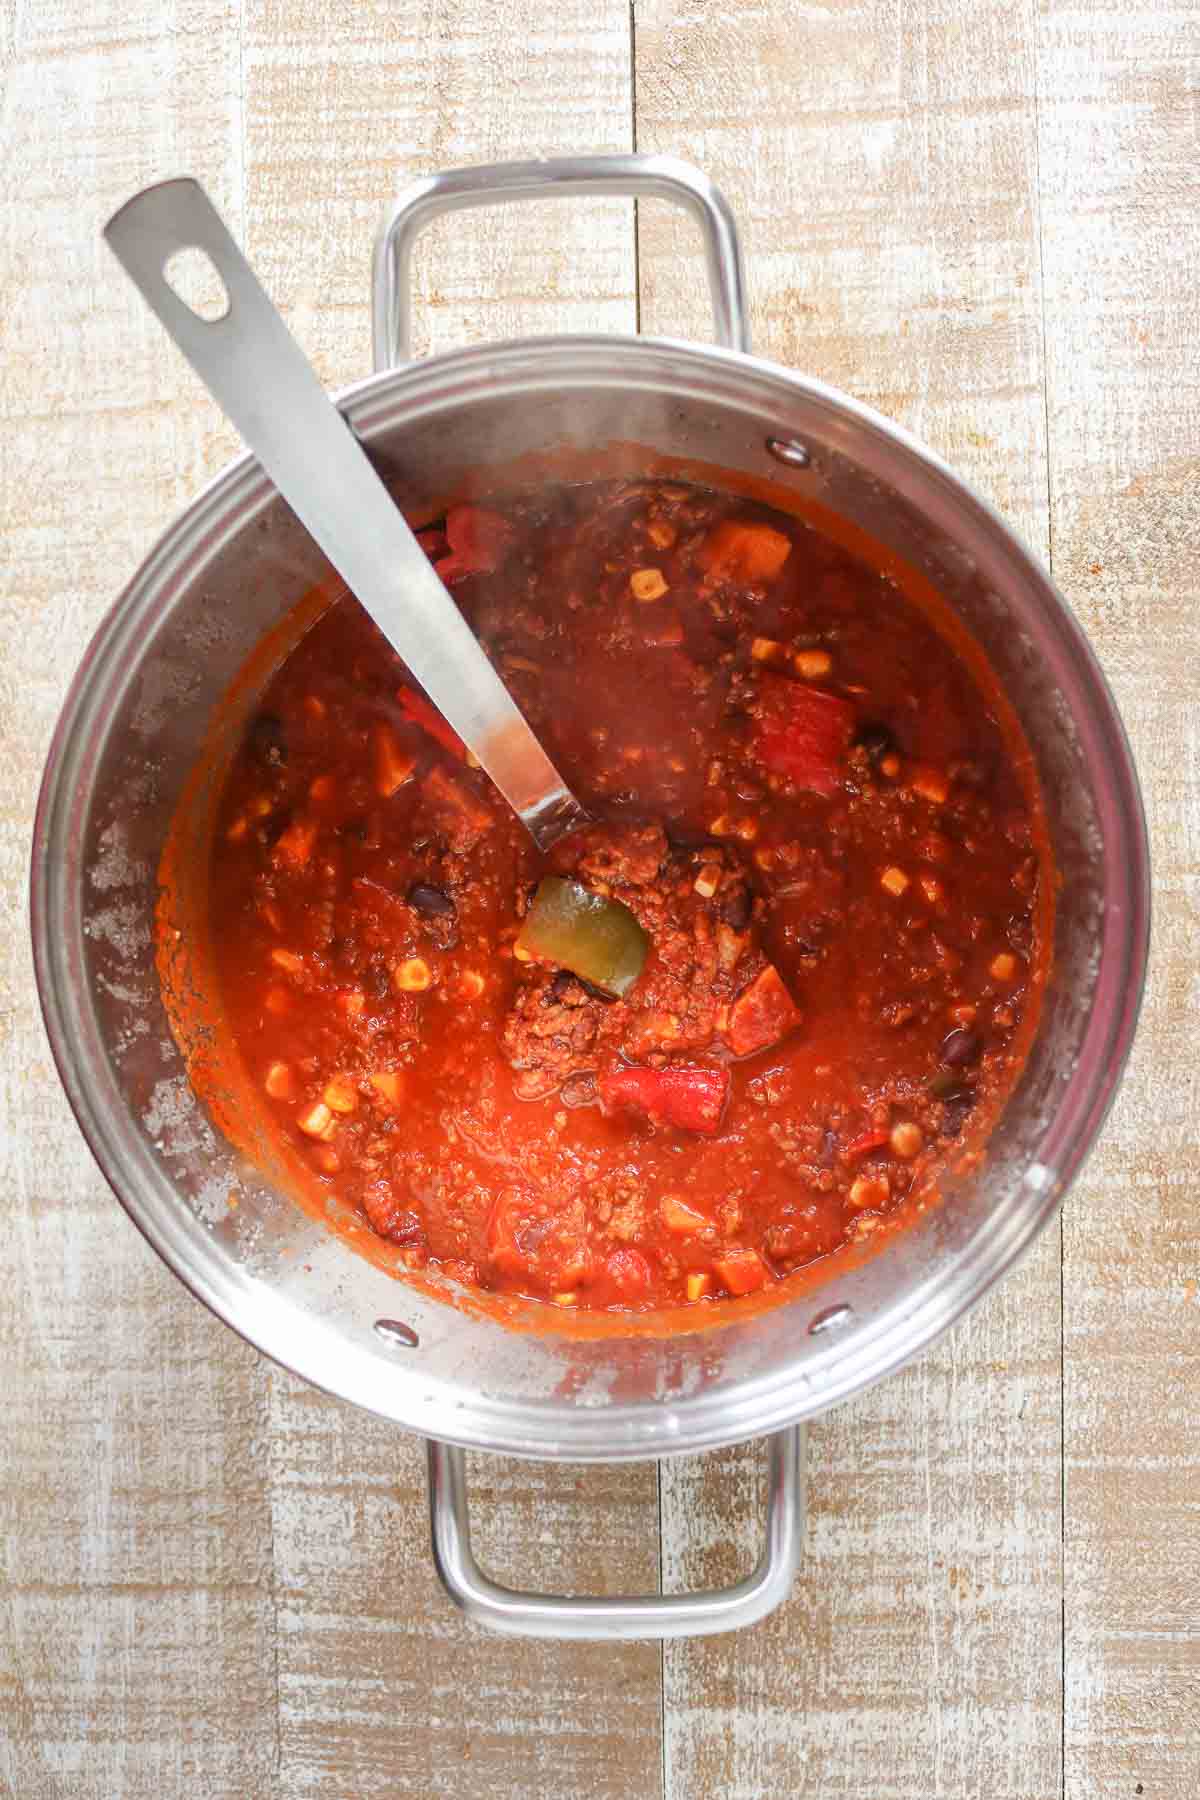 Pot of chili with a ladle resting in it.